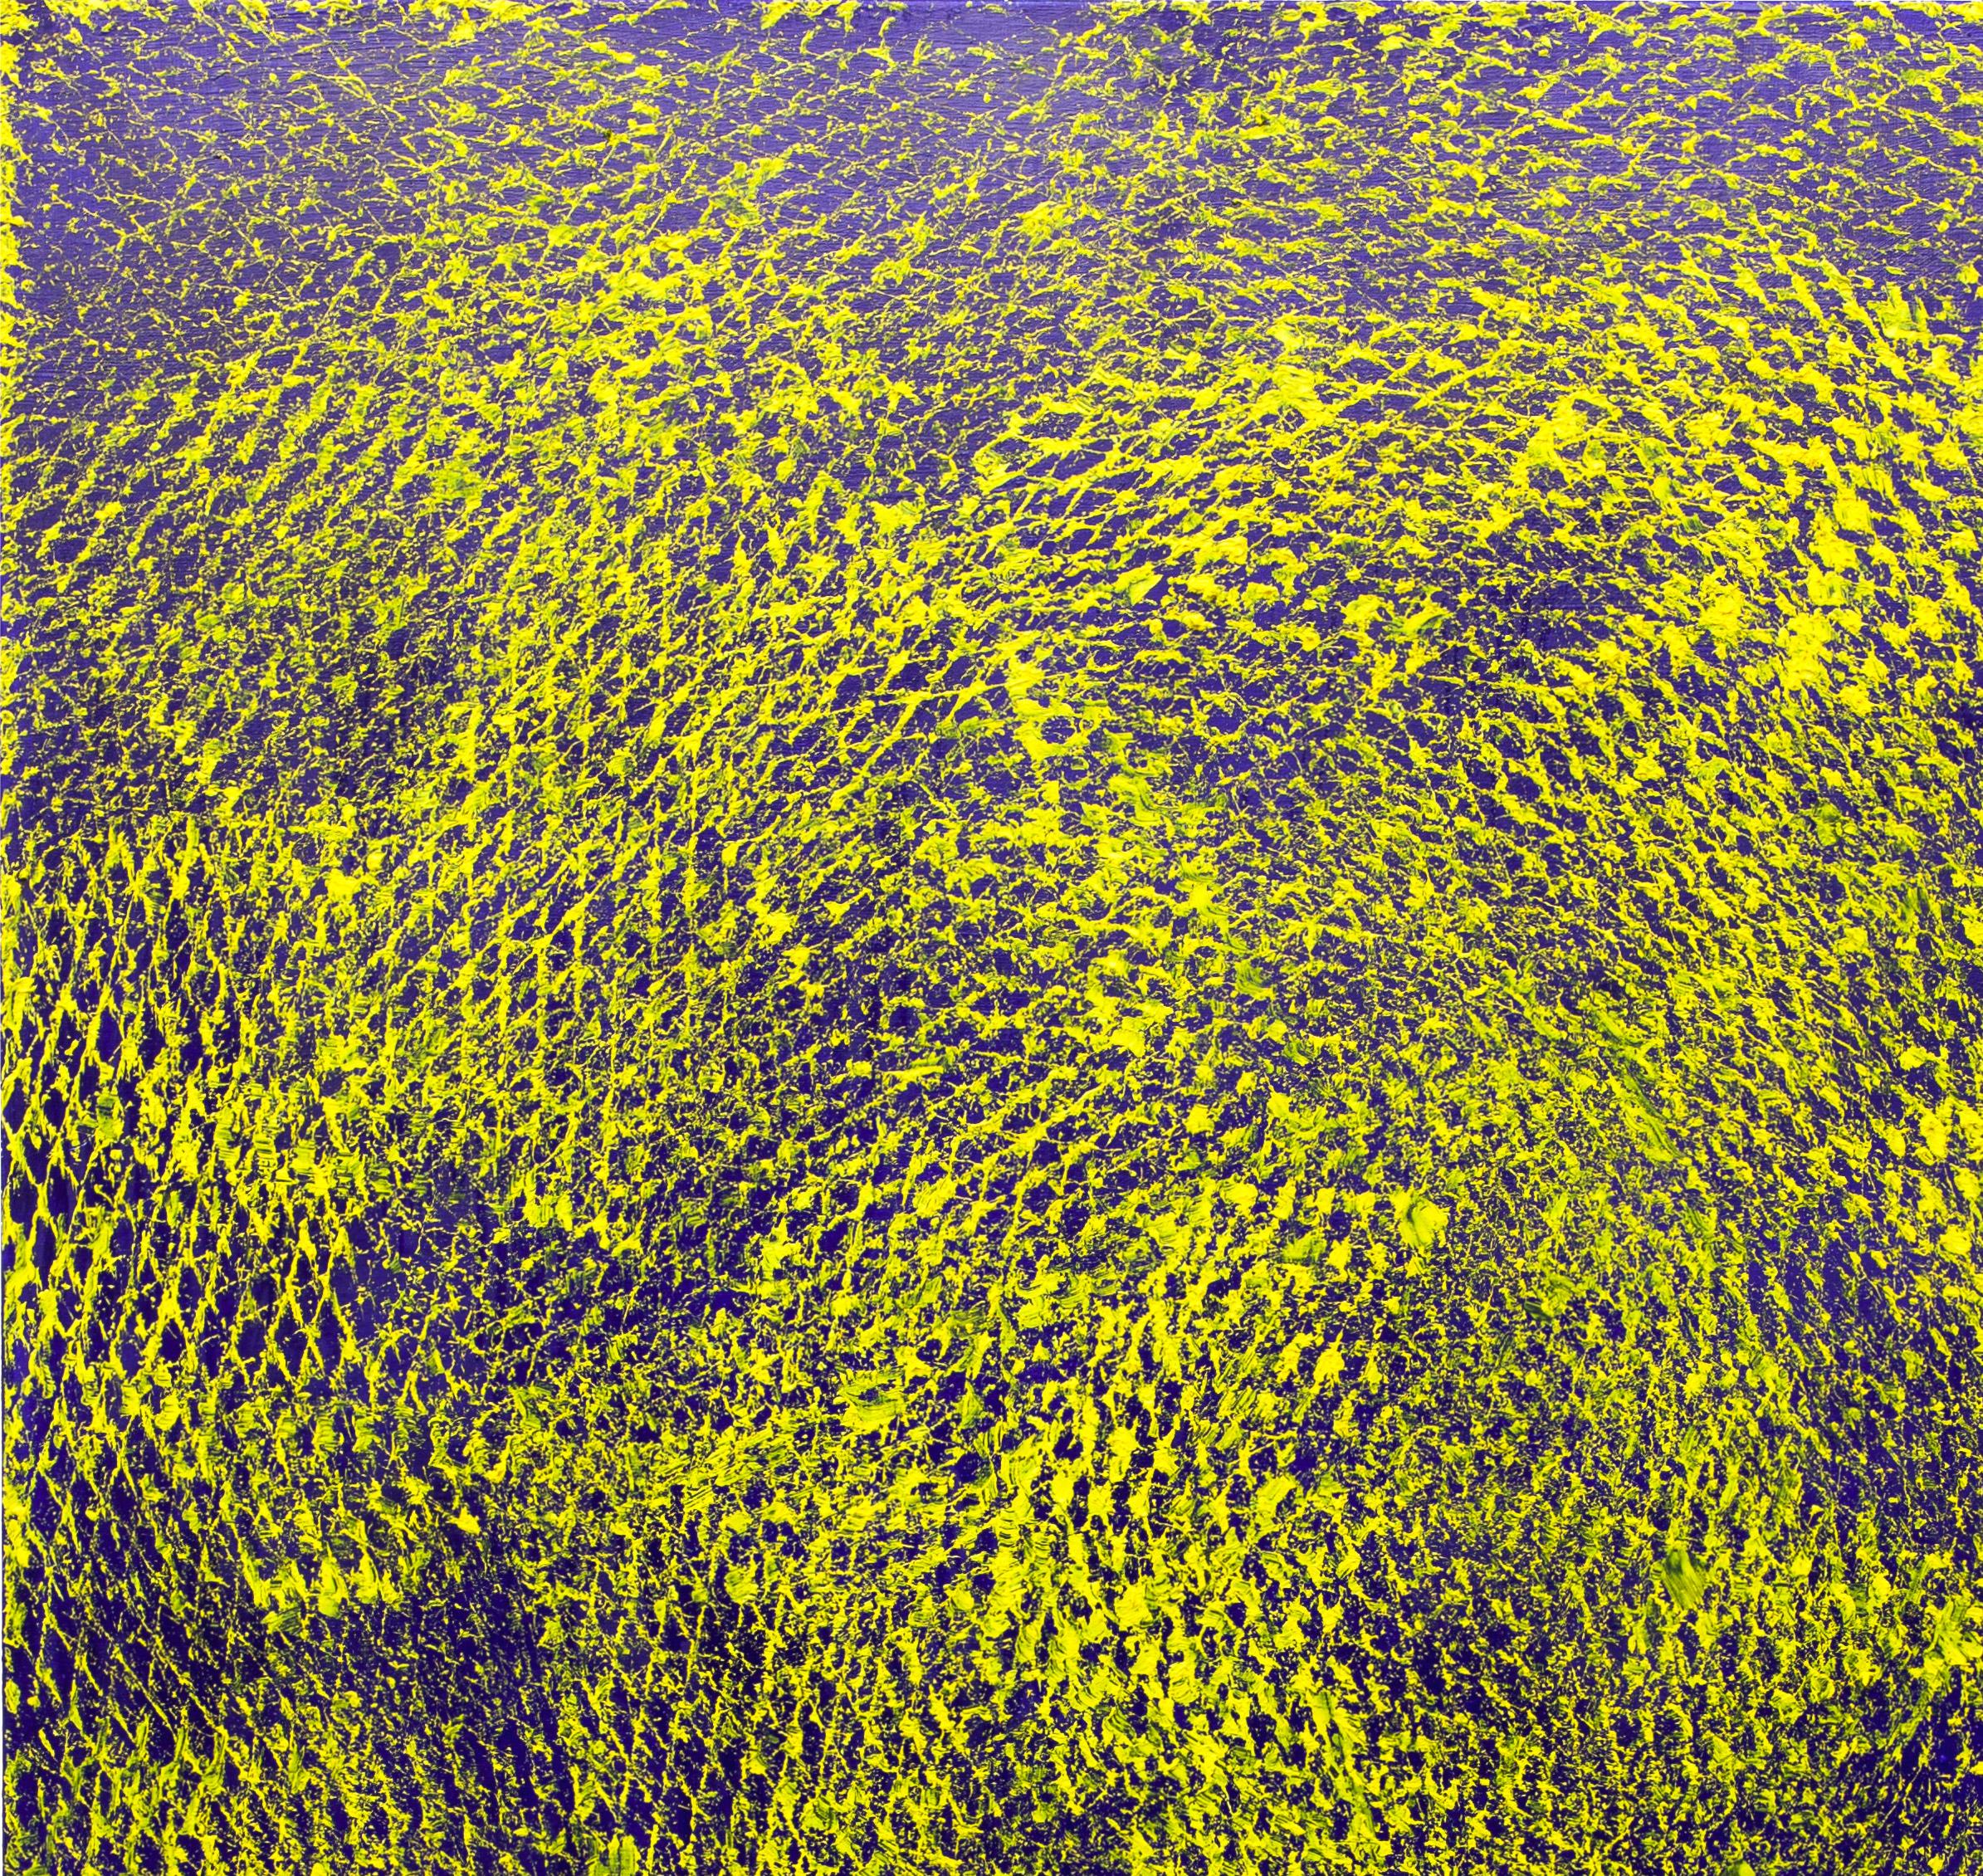 Blue and Yellow, Expanded Metal Painting, 2020 by Clemens Wolf
From the series Expanded Metal Paintings
Oil on canvas
Size: 200 H x 150 W CM 
Unpacked: 7,5 kg Approx.
Hand-signed back by the artist
Mounted on a stretcher
Unique

Expanded Metal